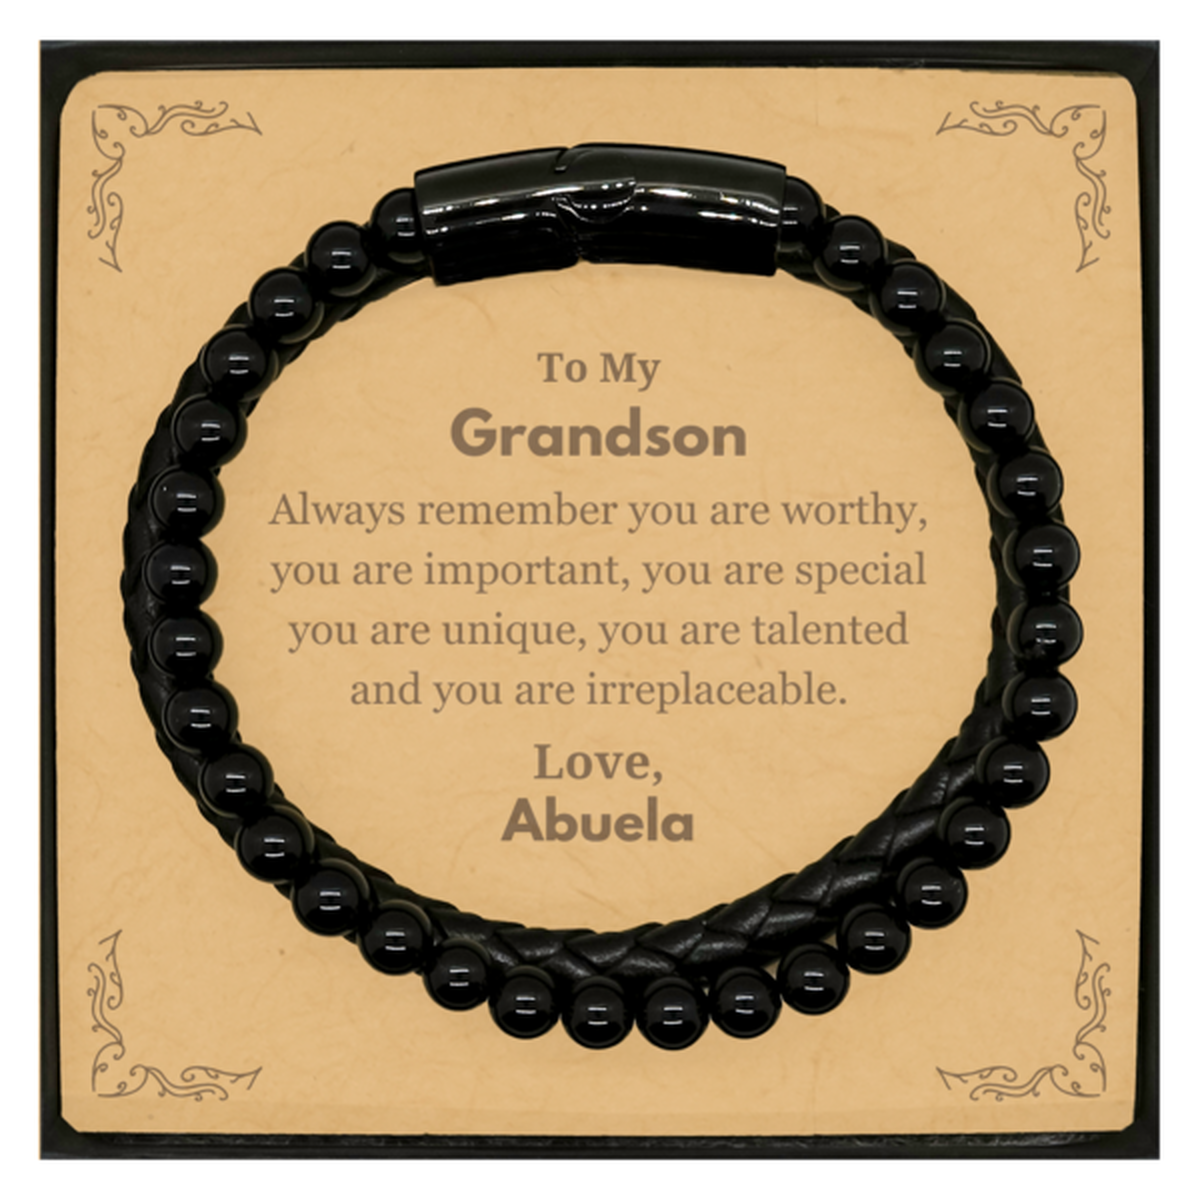 Grandson Birthday Gifts from Abuela, Inspirational Stone Leather Bracelets for Grandson Christmas Graduation Gifts for Grandson Always remember you are worthy, you are important. Love, Abuela